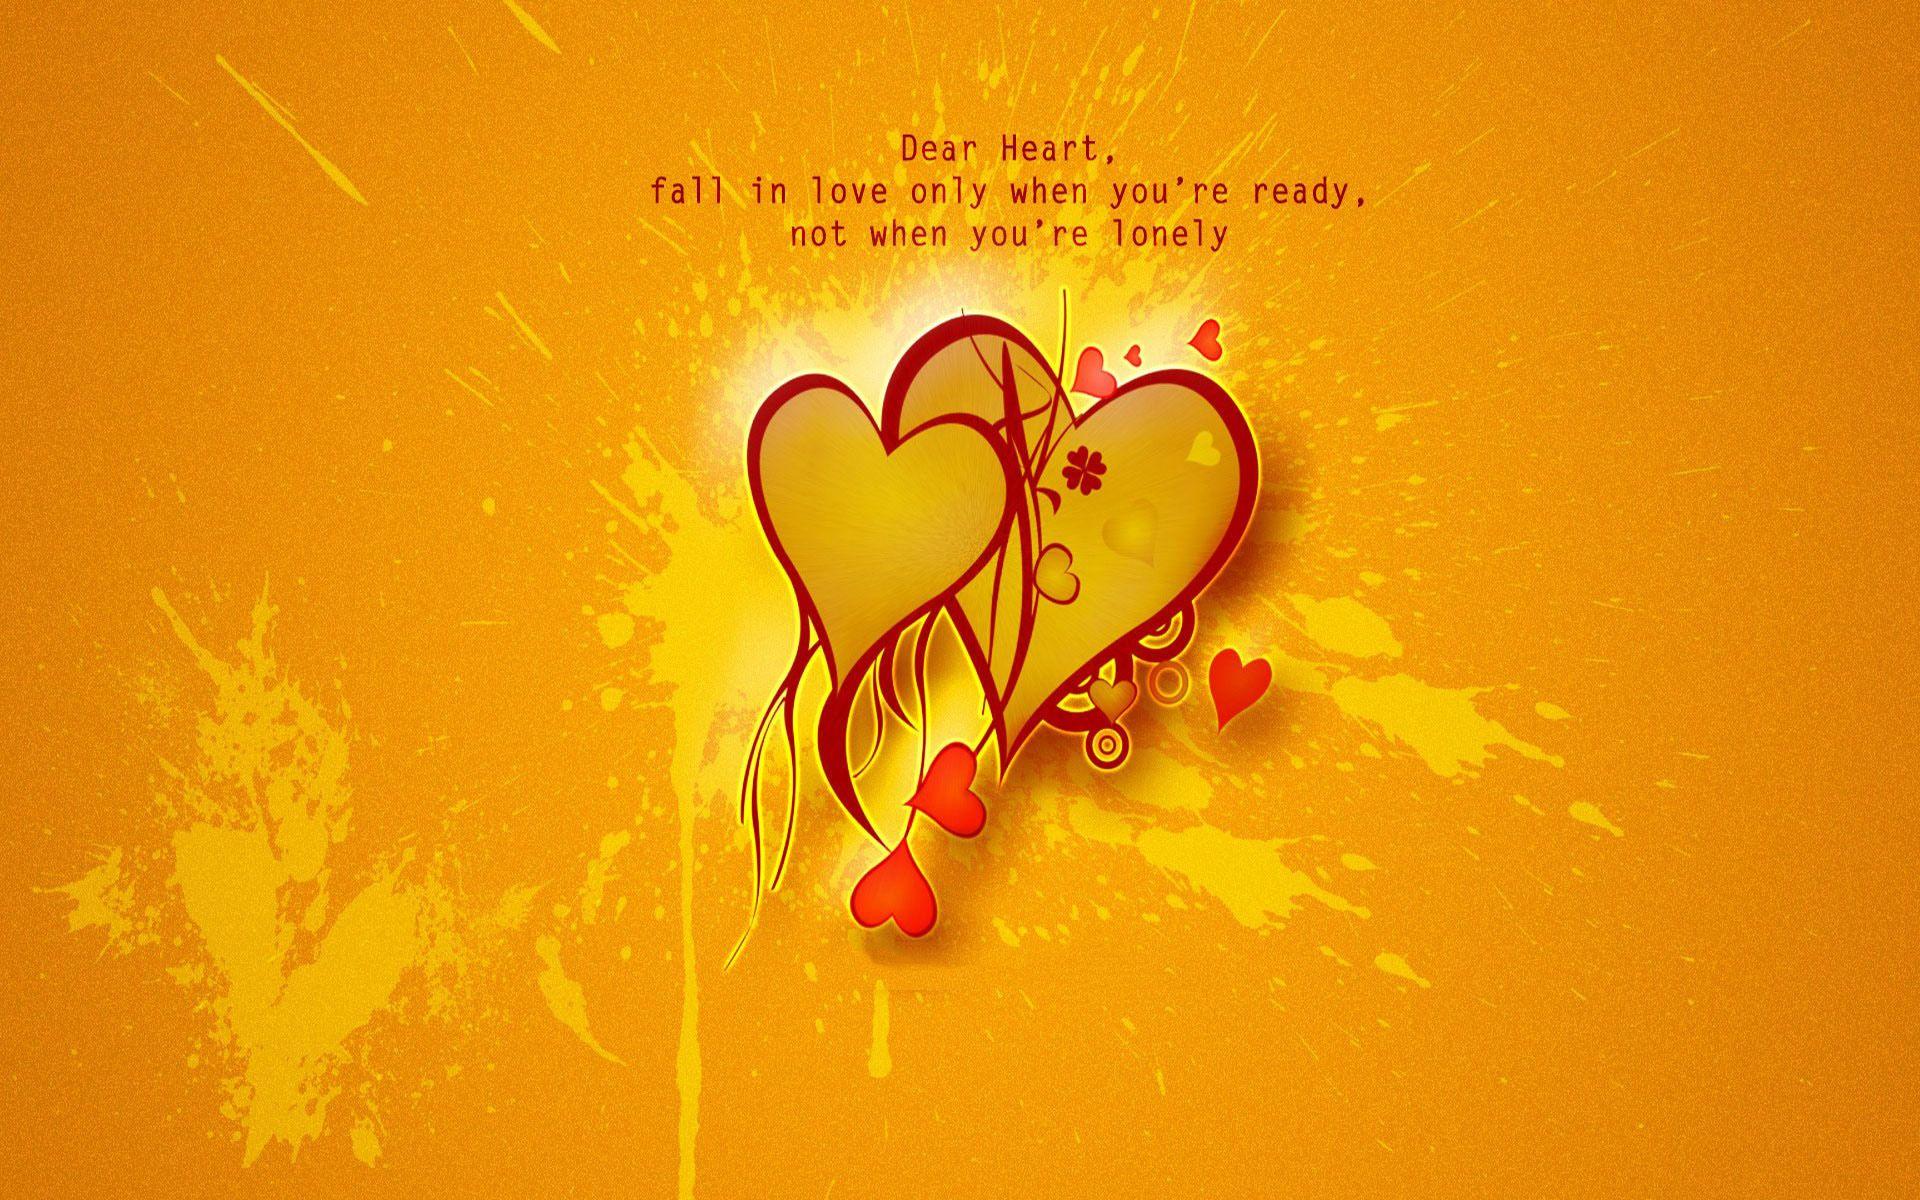 Sweet Love Wallpaper Free Download For Him & Her